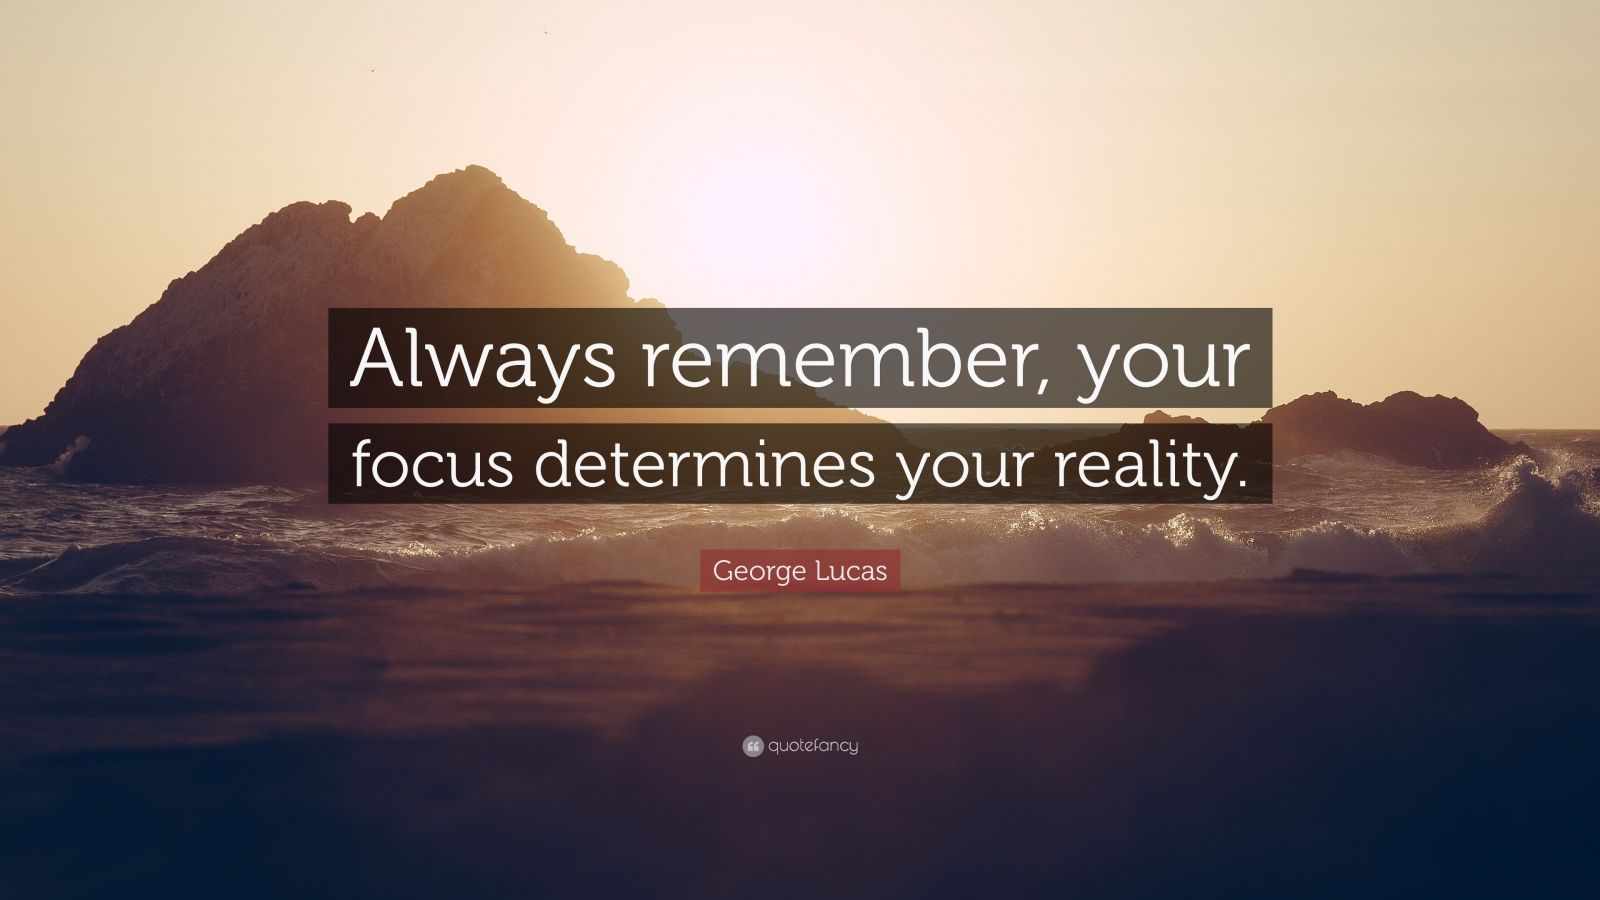 George Lucas Quote: “Always remember, your focus determines your ...